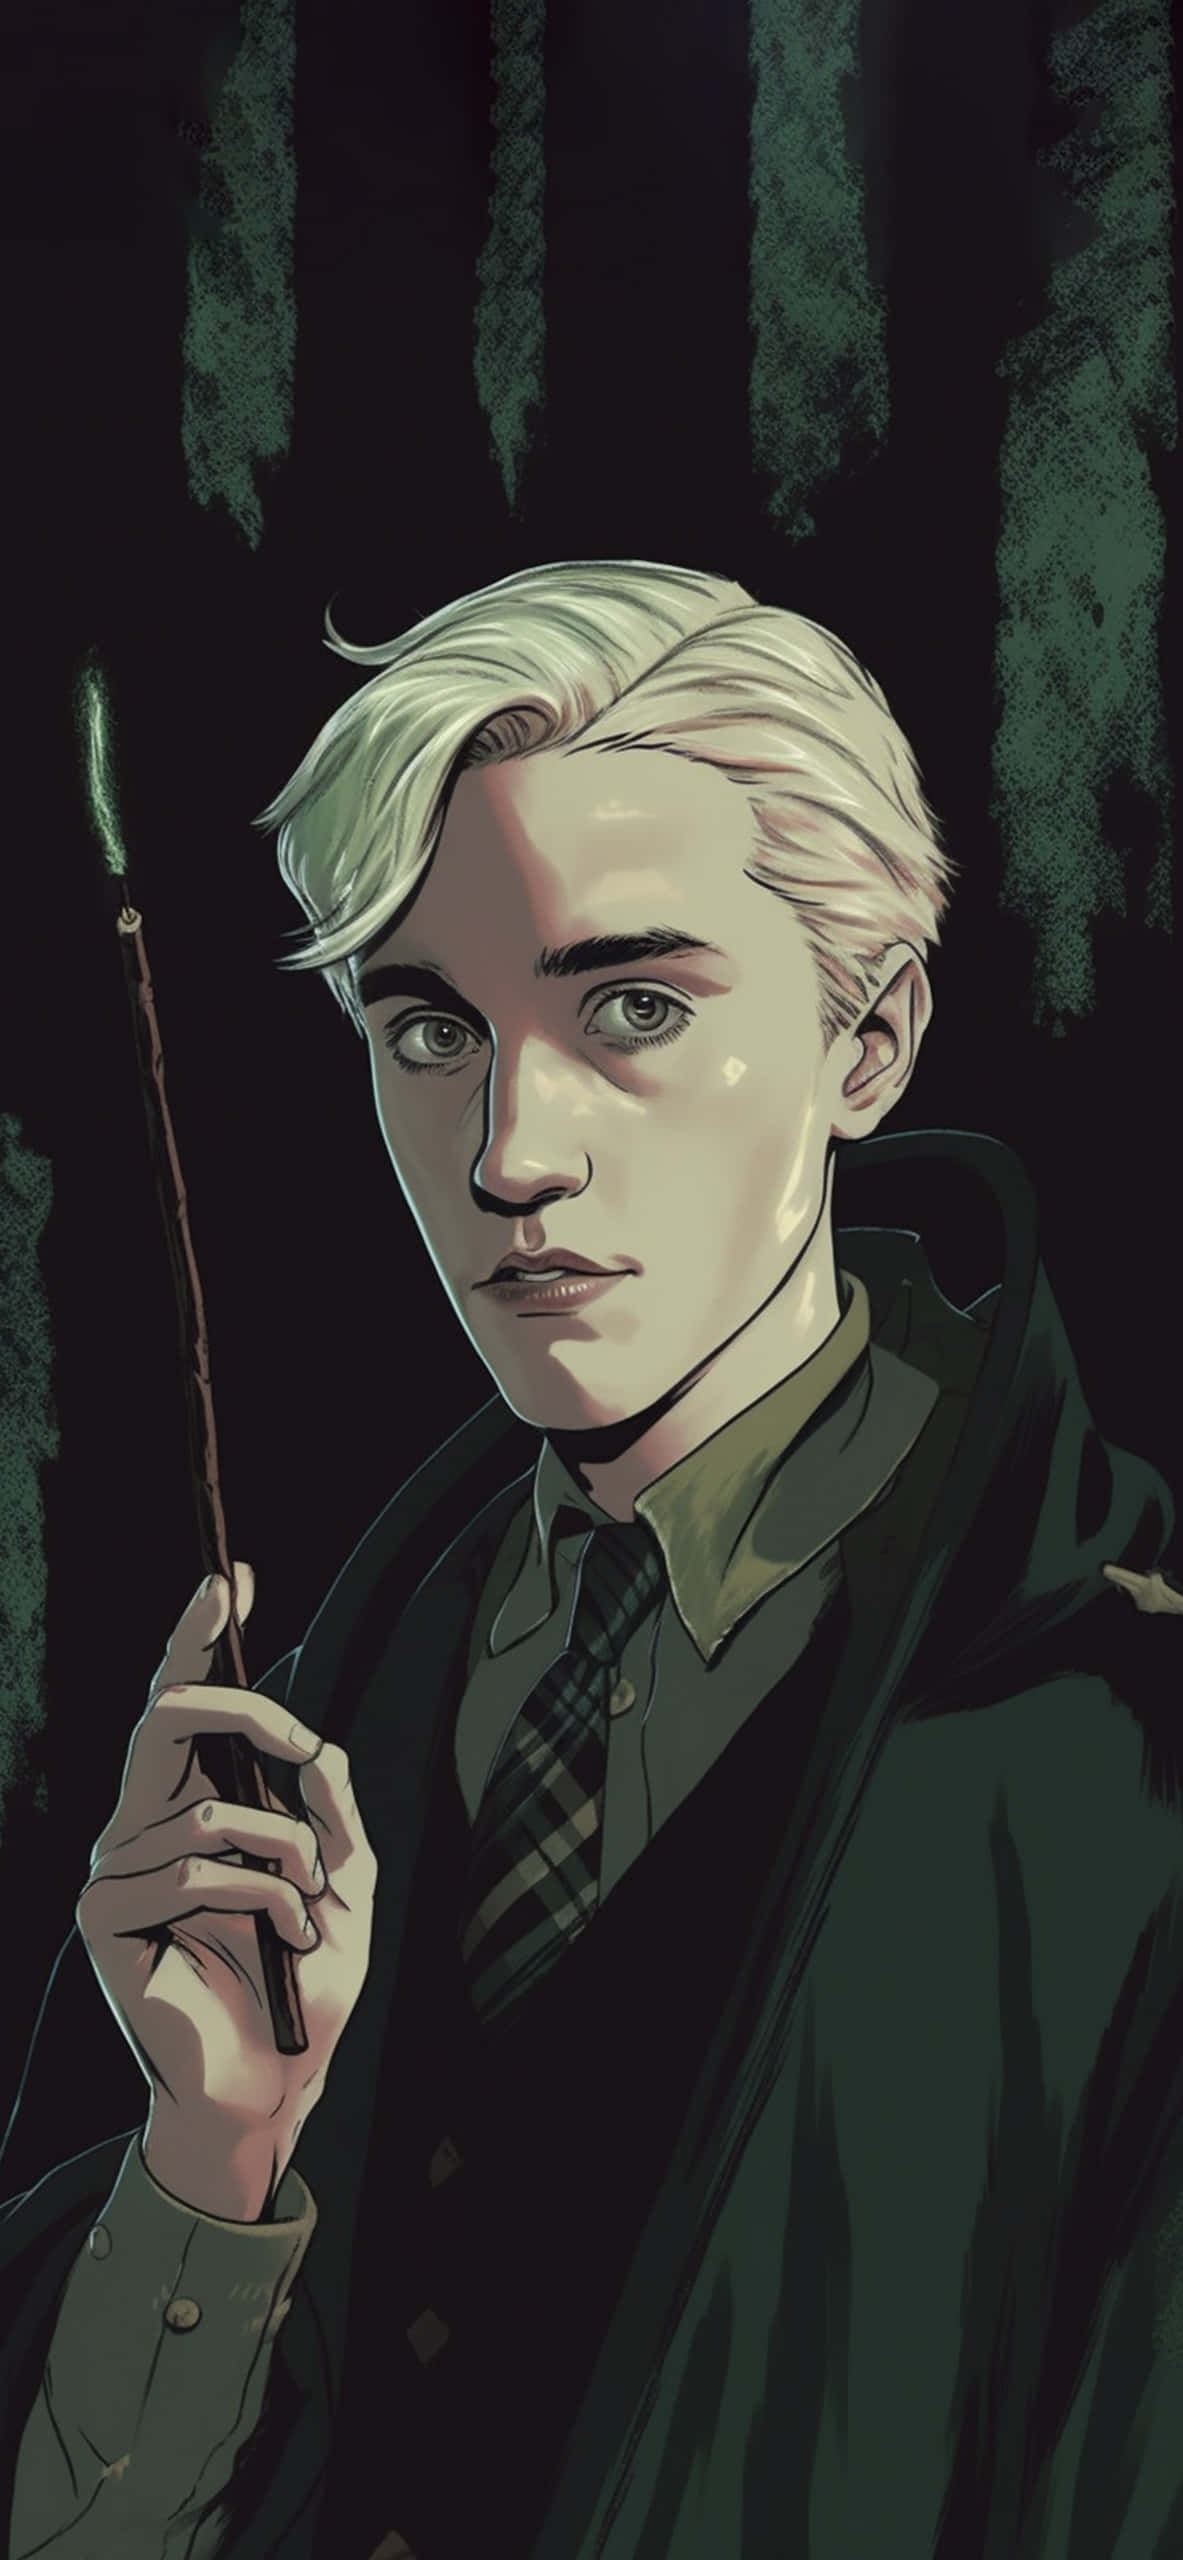 Draco Malfoy of the Harry Potter series